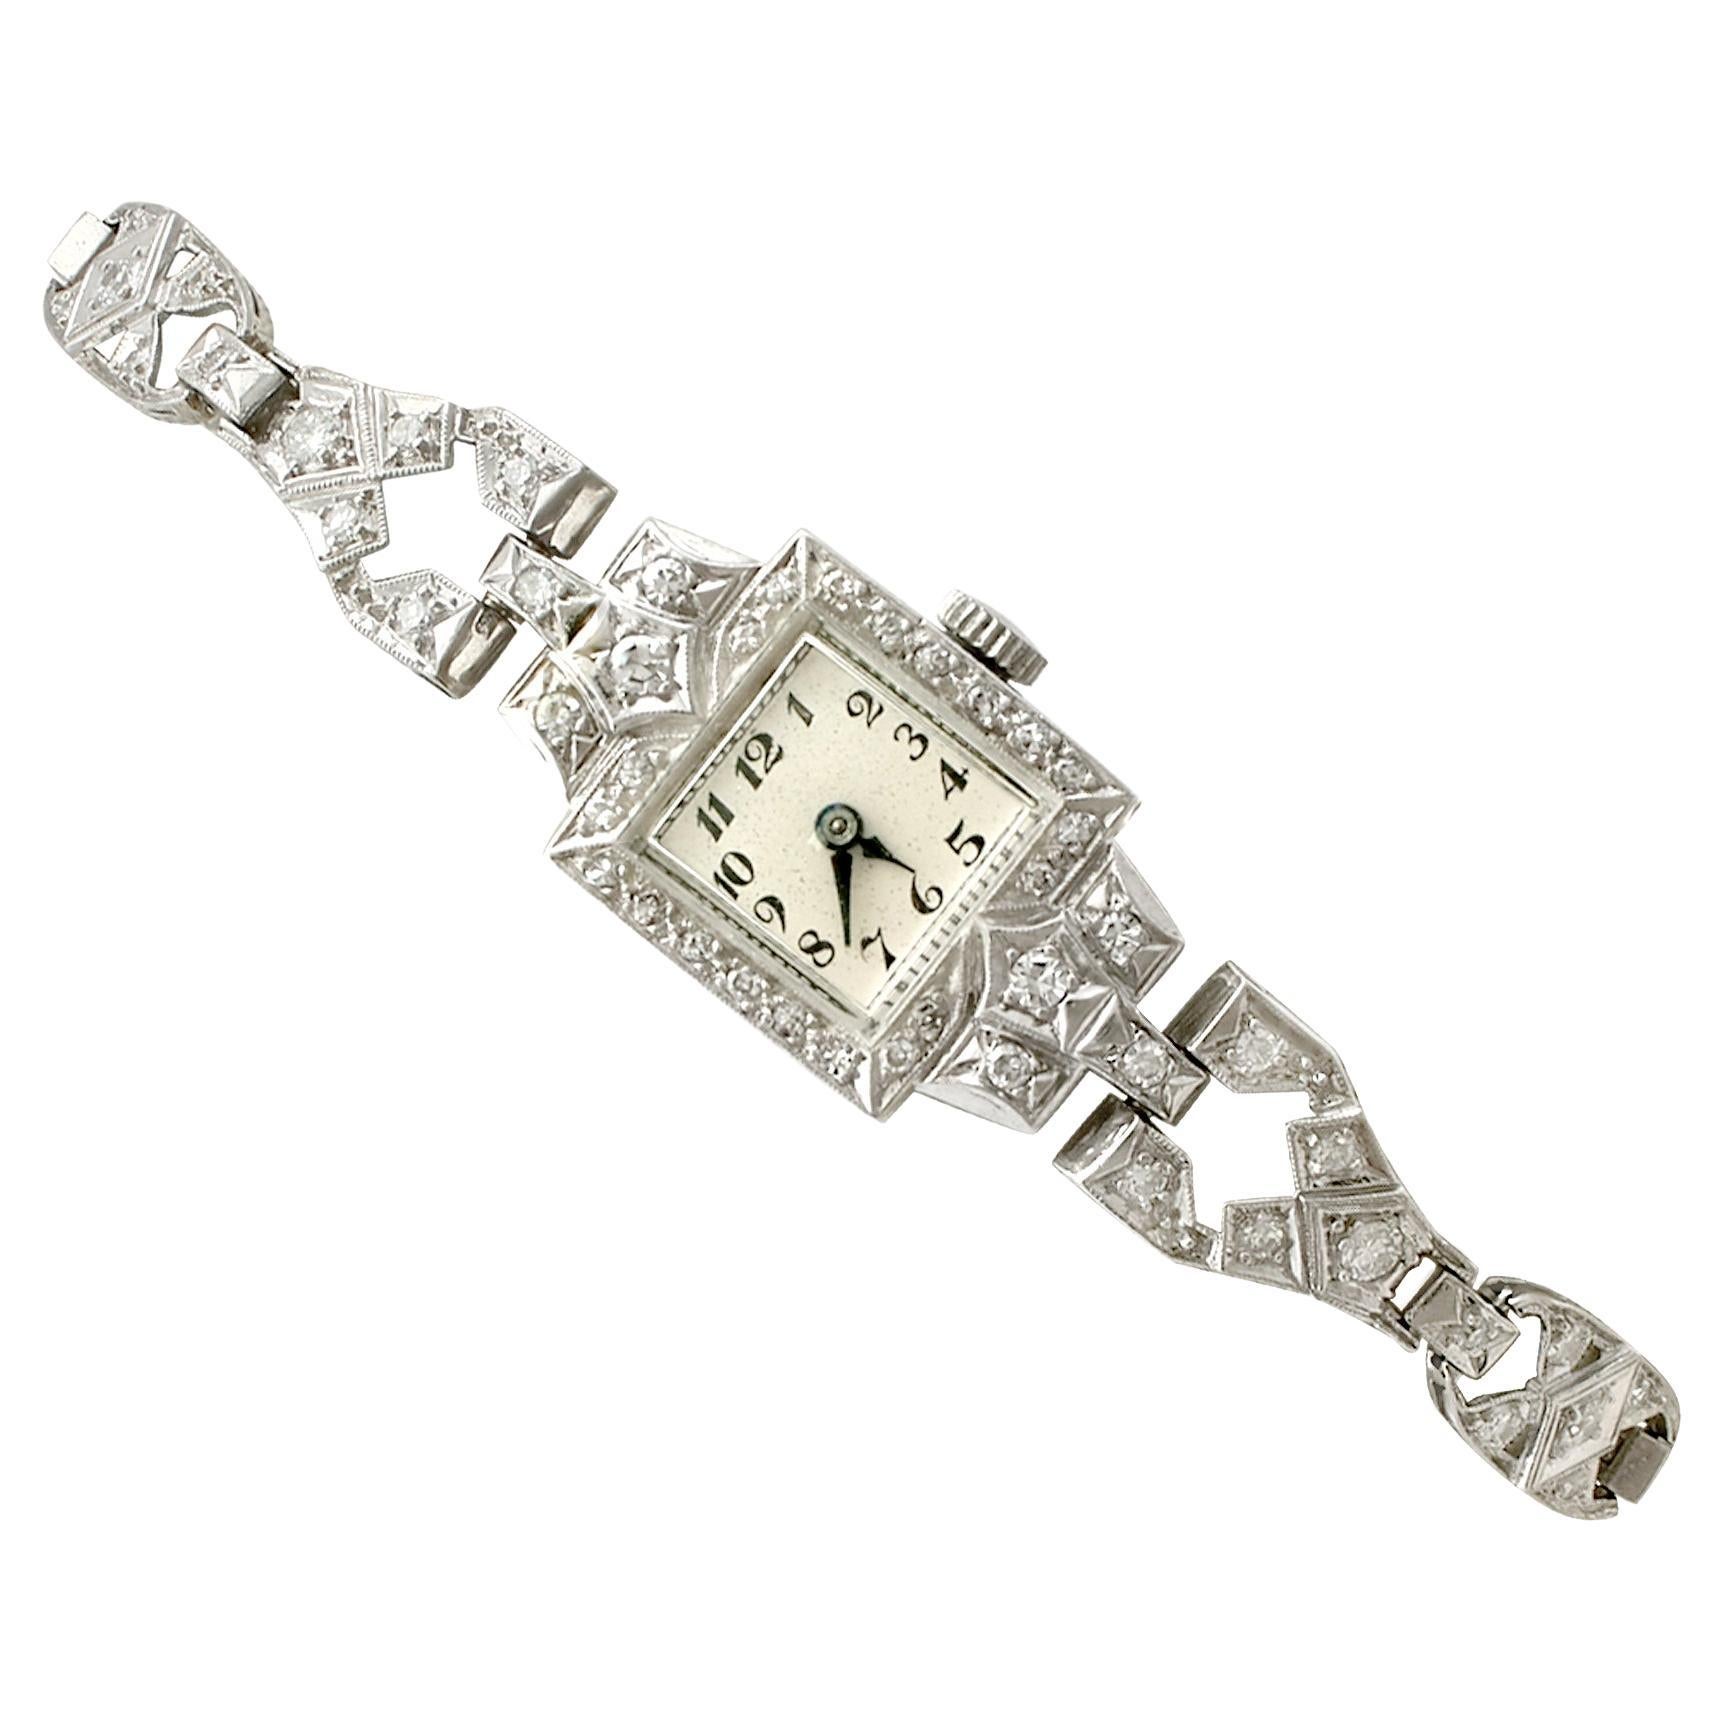 Vintage 2 Carat Diamond and Platinum Thin Watch For Sale at 1stDibs